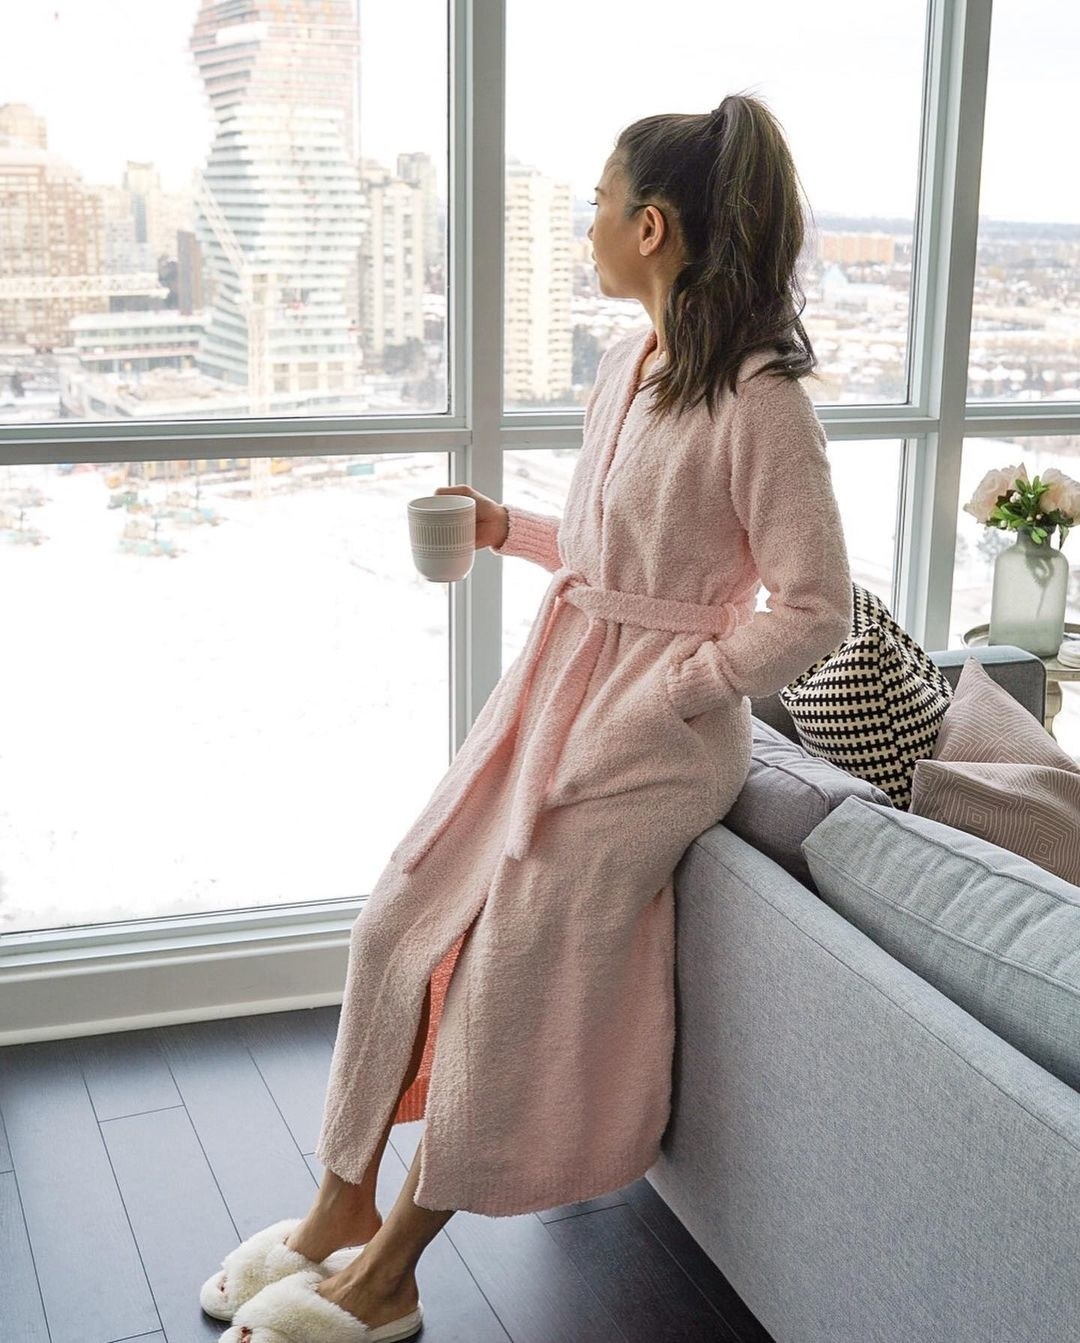 Person wearing the robe and sitting against a couch looking out the window